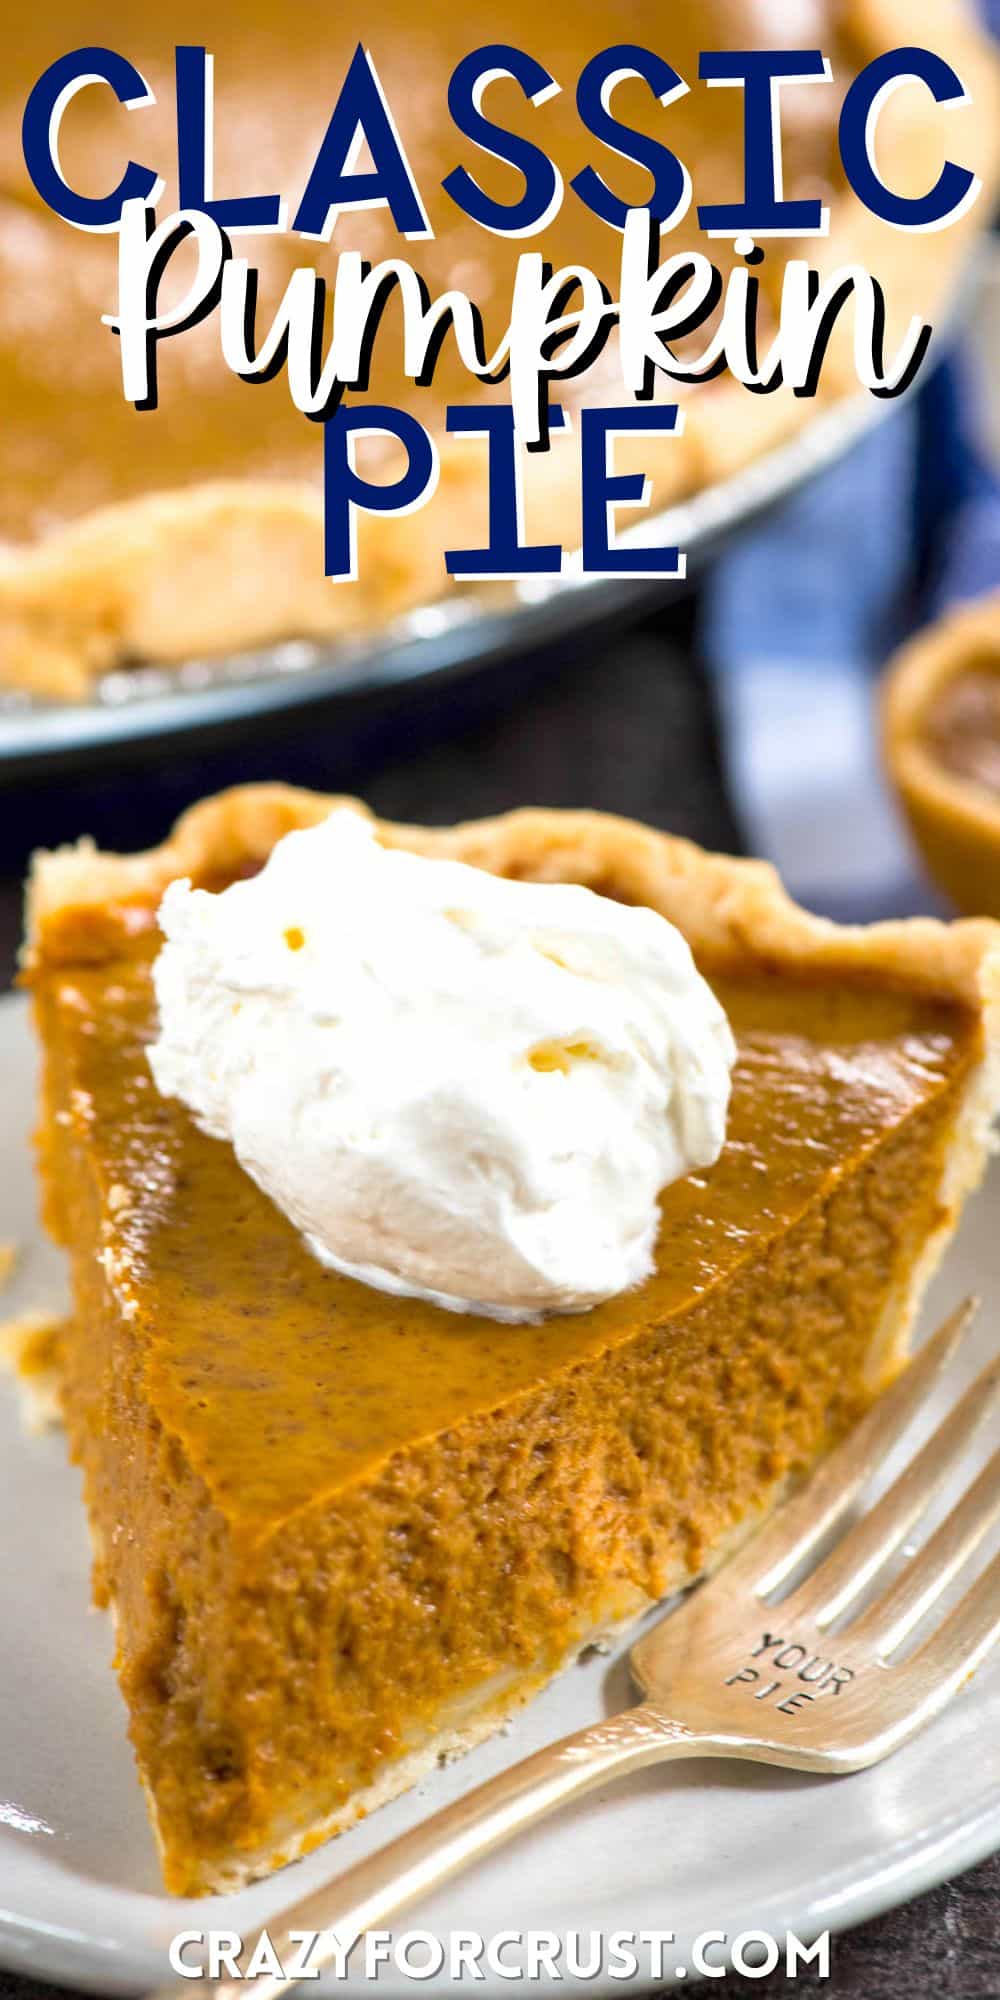 one triangle slice of pumpkin pie with a dollop of whipped cream on a white plate with words on the image.